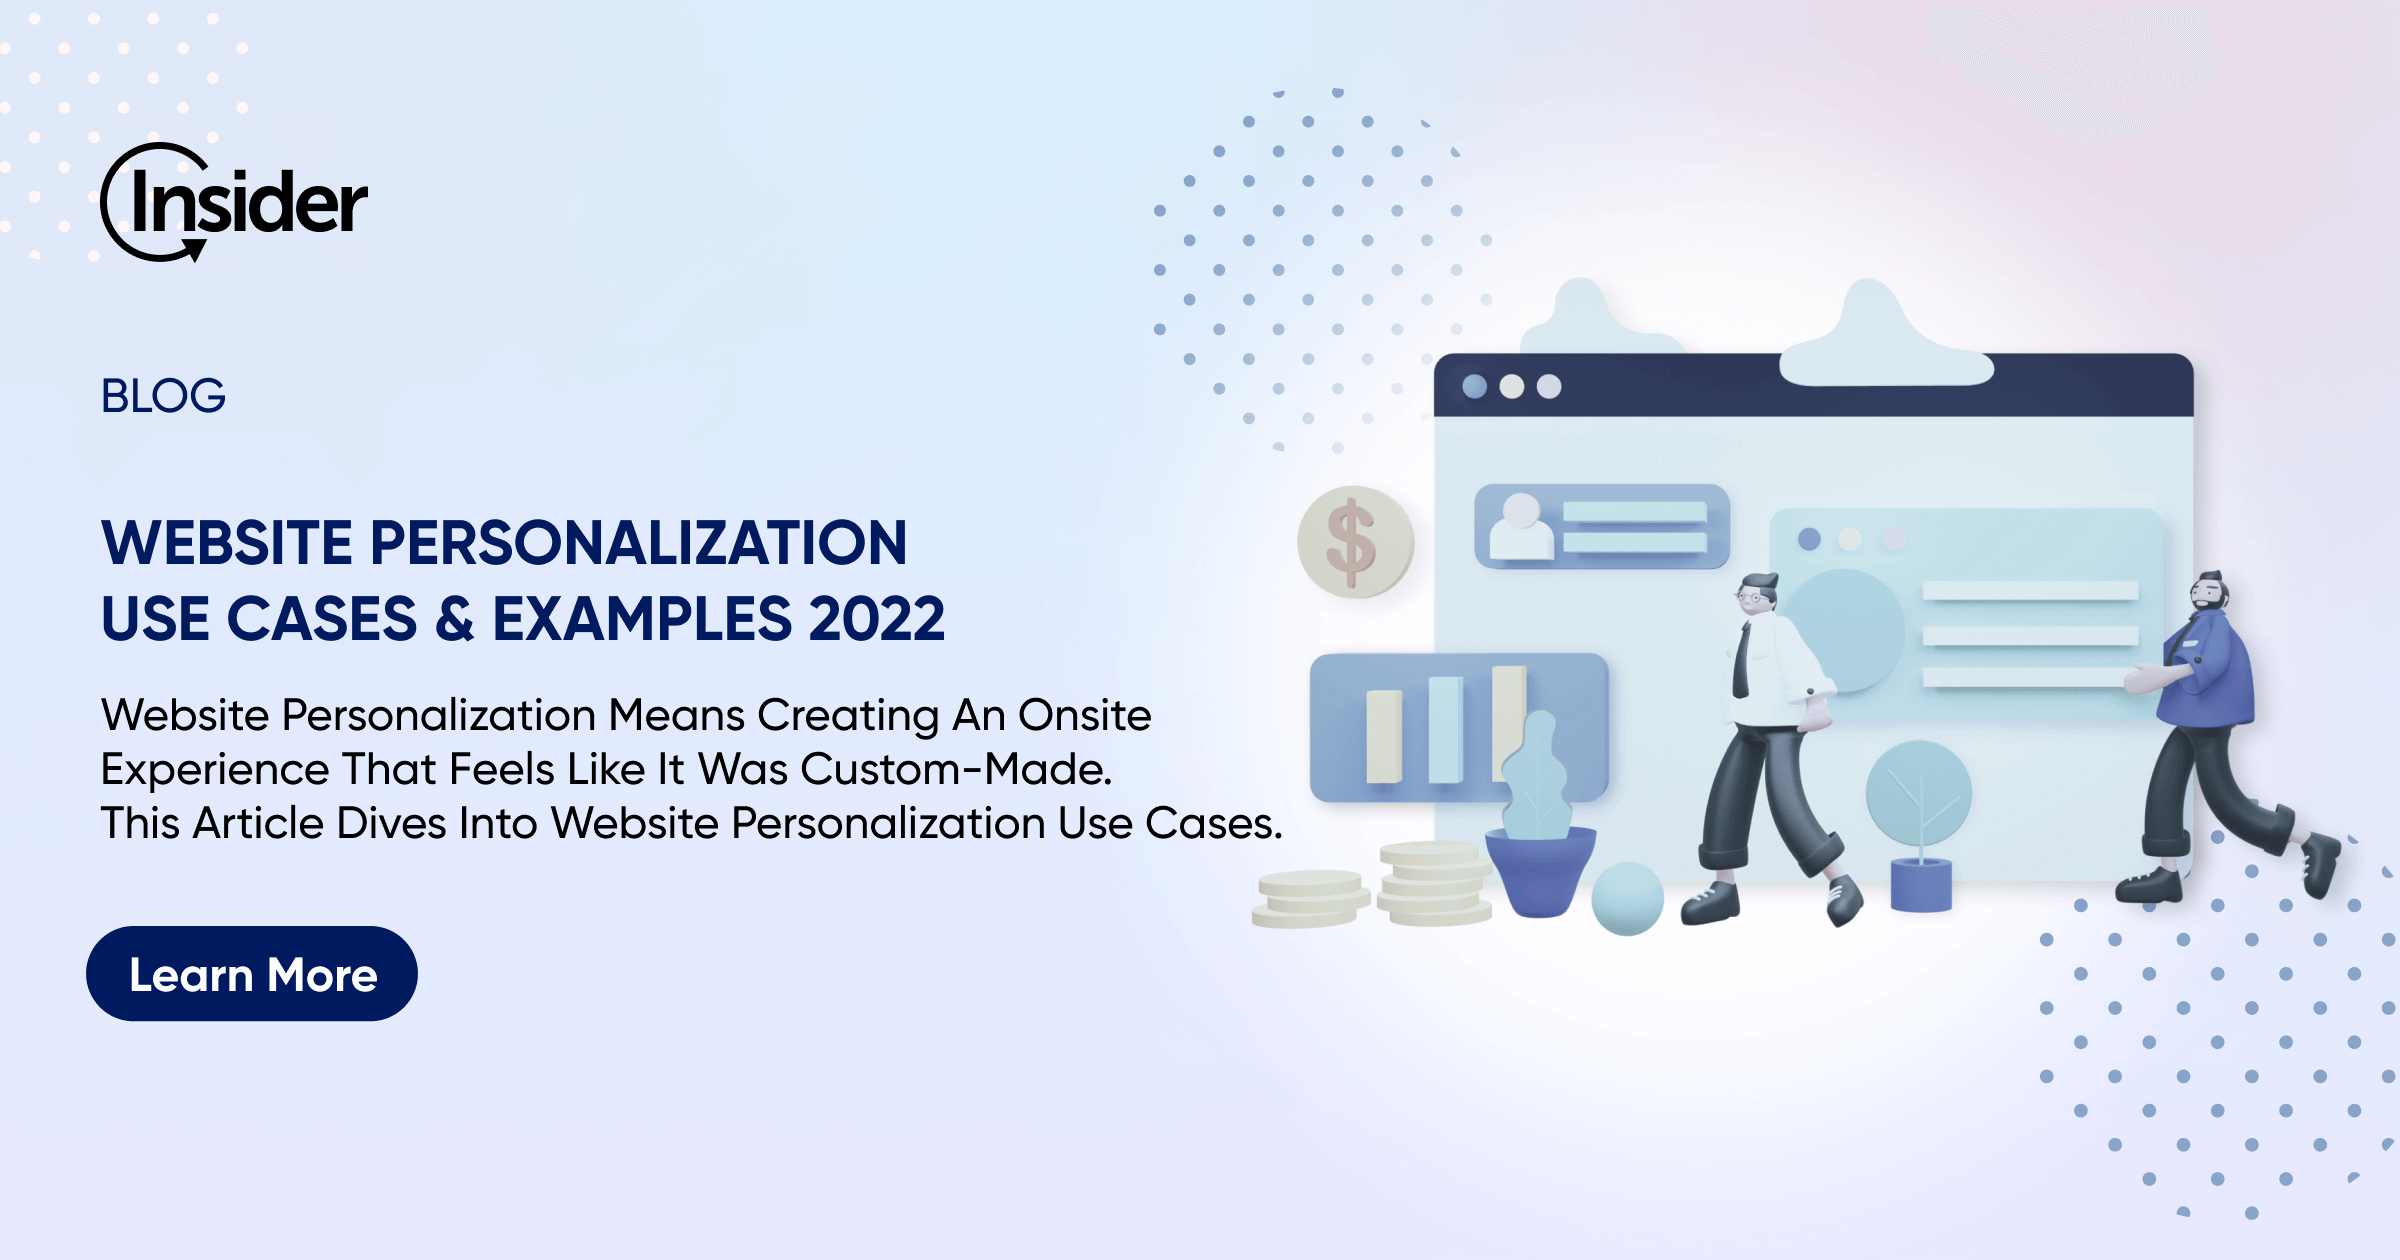 Website personalization use cases & examples 2022